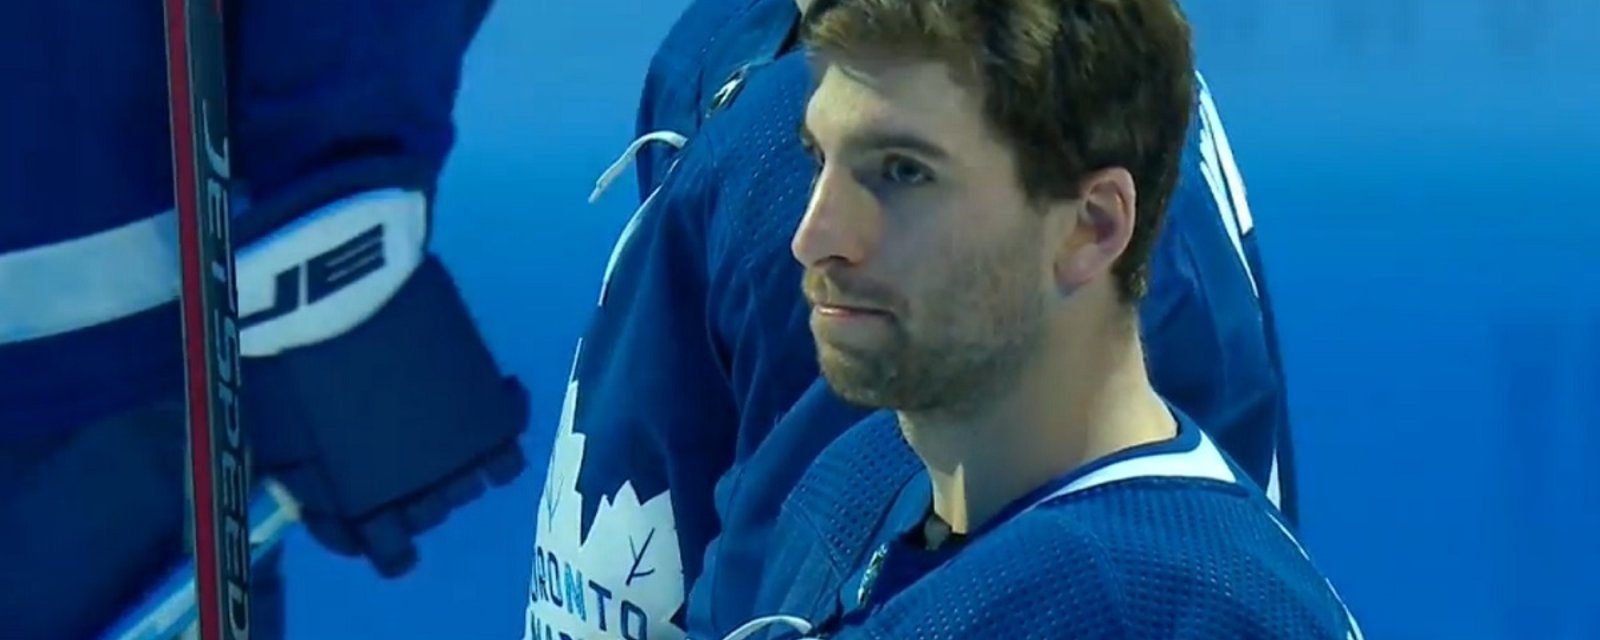 Toronto fans welcome back Tavares with intense ovation after rough game in Long Island.